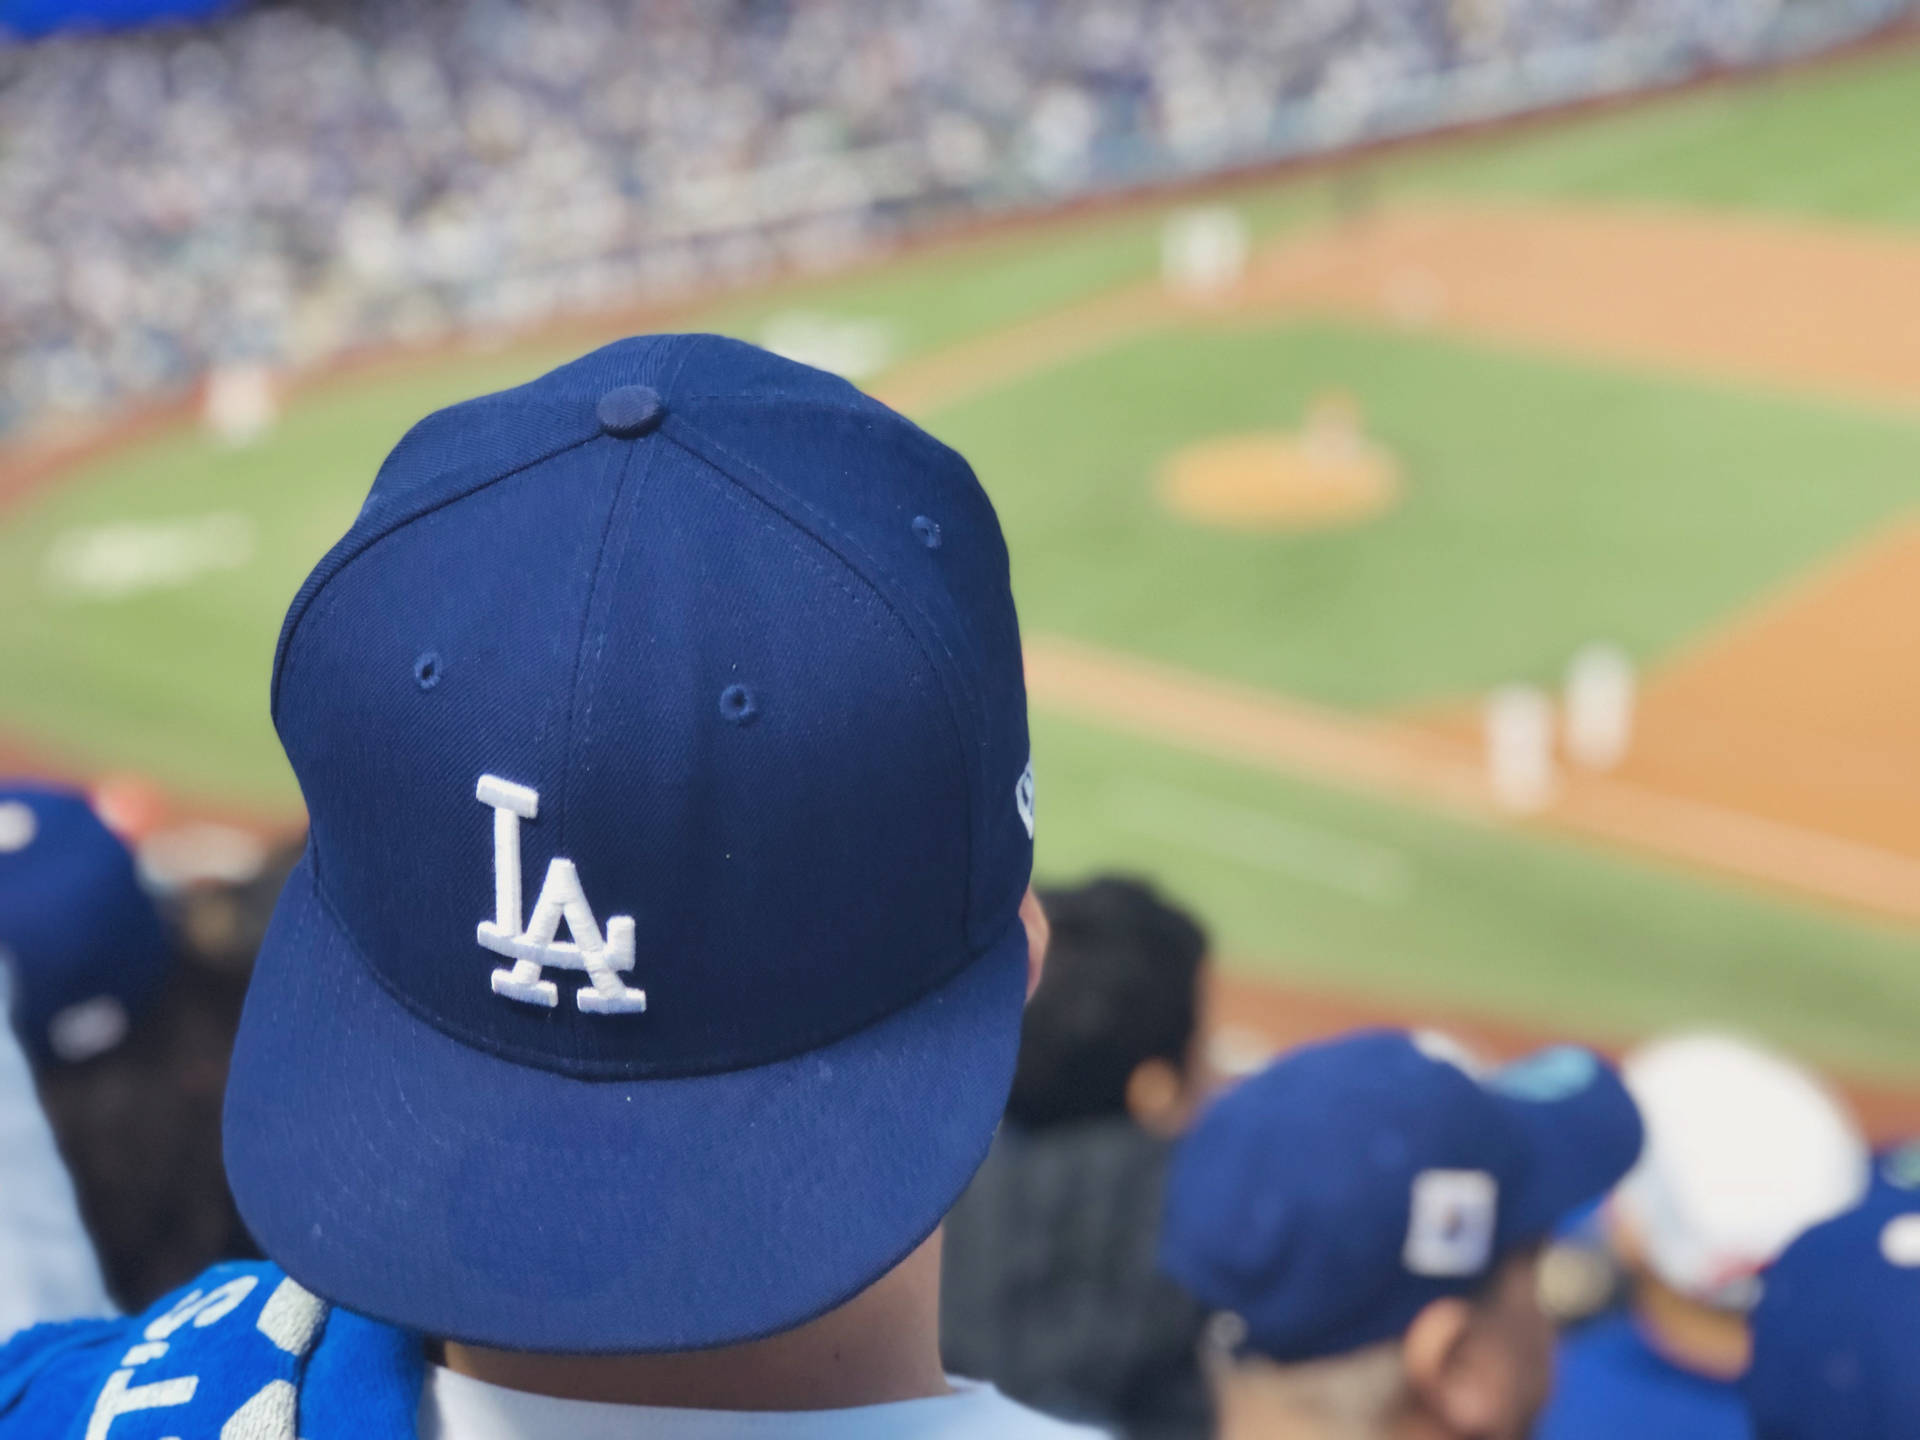 Los Angeles Dodgers Pictures